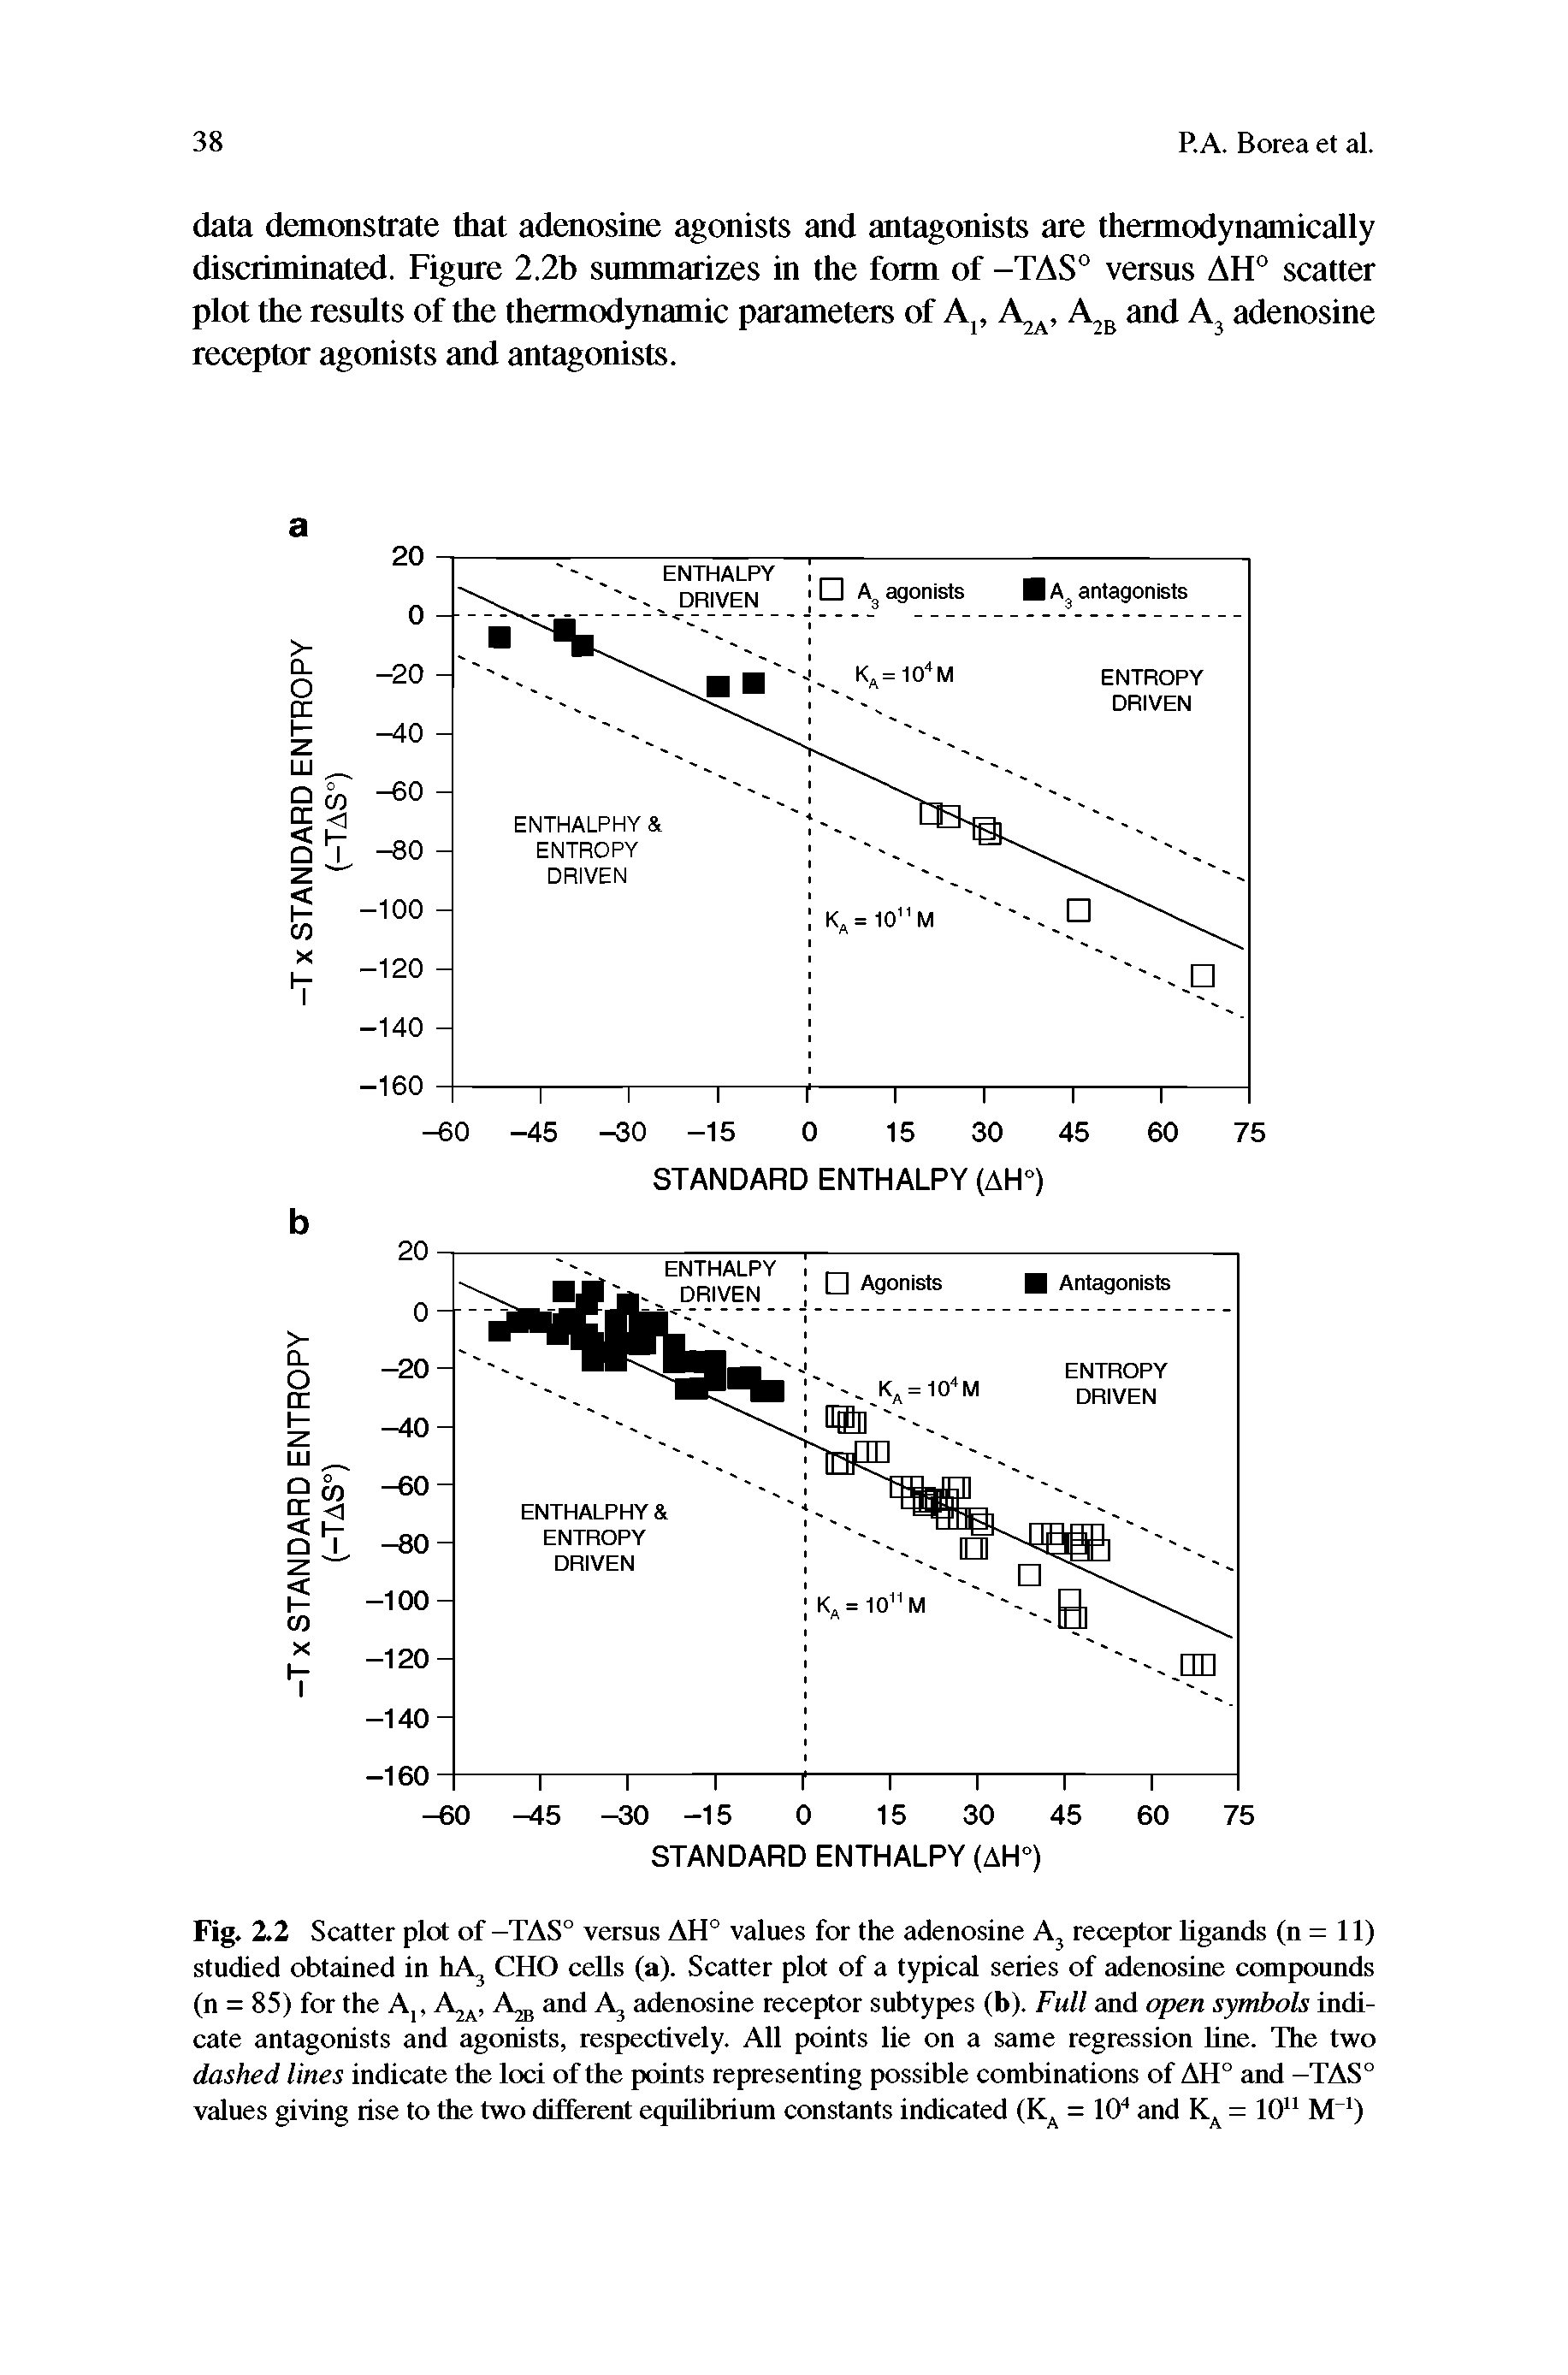 Fig. 2.2 Scatter plot of -TAS° versus AH° values for the adenosine A3 receptor ligands (n = 11) studied obtained in hA3 CHO cells (a). Scatter plot of a typical series of adenosine compounds (n = 85) for the A, A2A, A2B and A3 adenosine receptor subtypes (b). Full and open symbols indicate antagonists and agonists, respectively. All points lie on a same regression line. The two dashed lines indicate the loci of the points representing possible combinations of AH° and -TAS° values giving rise to the two different equilibrium constants indicated (KA = 104 and KA = 1011 M )...